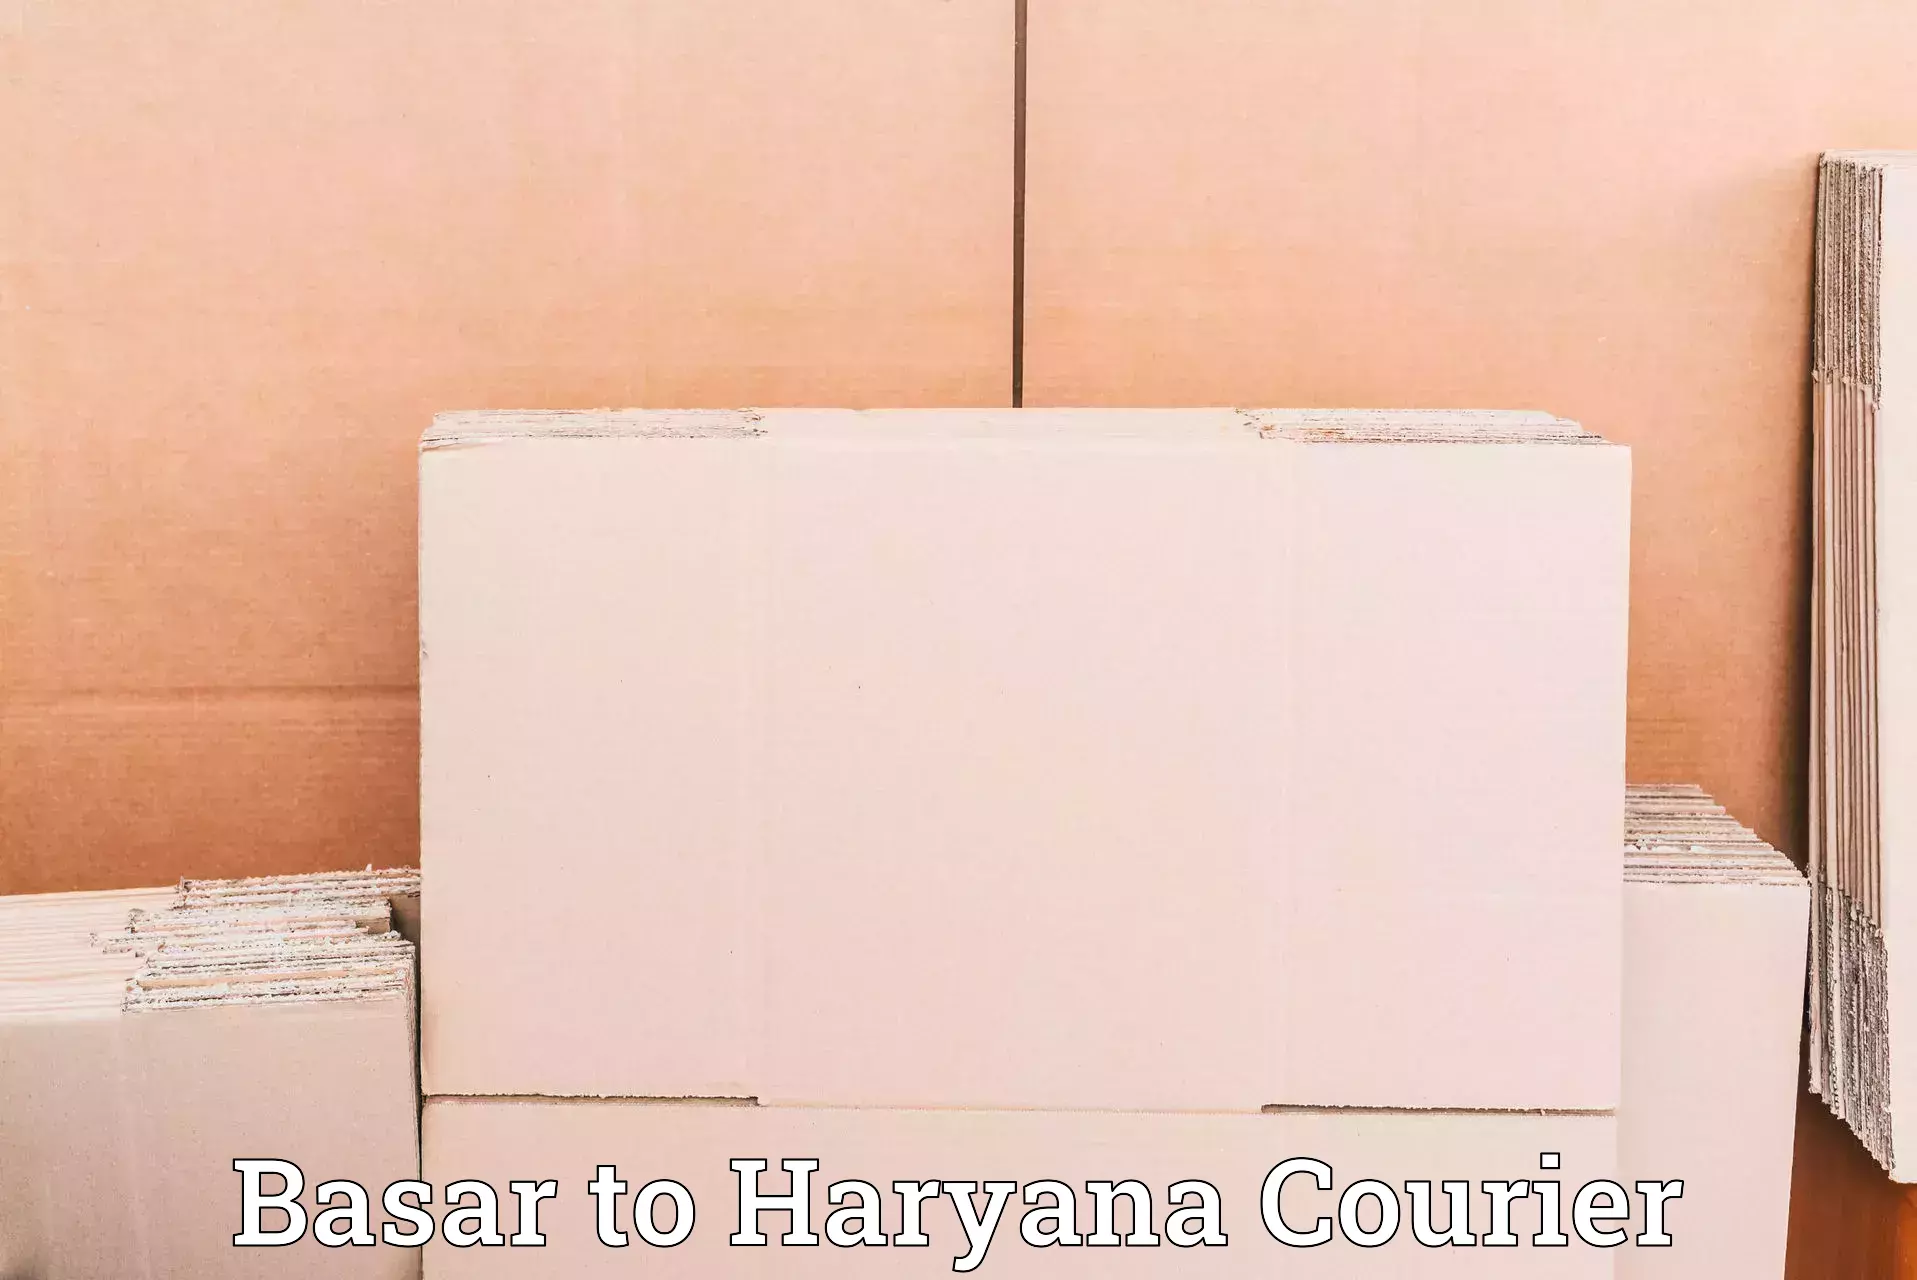 On-call courier service Basar to NCR Haryana